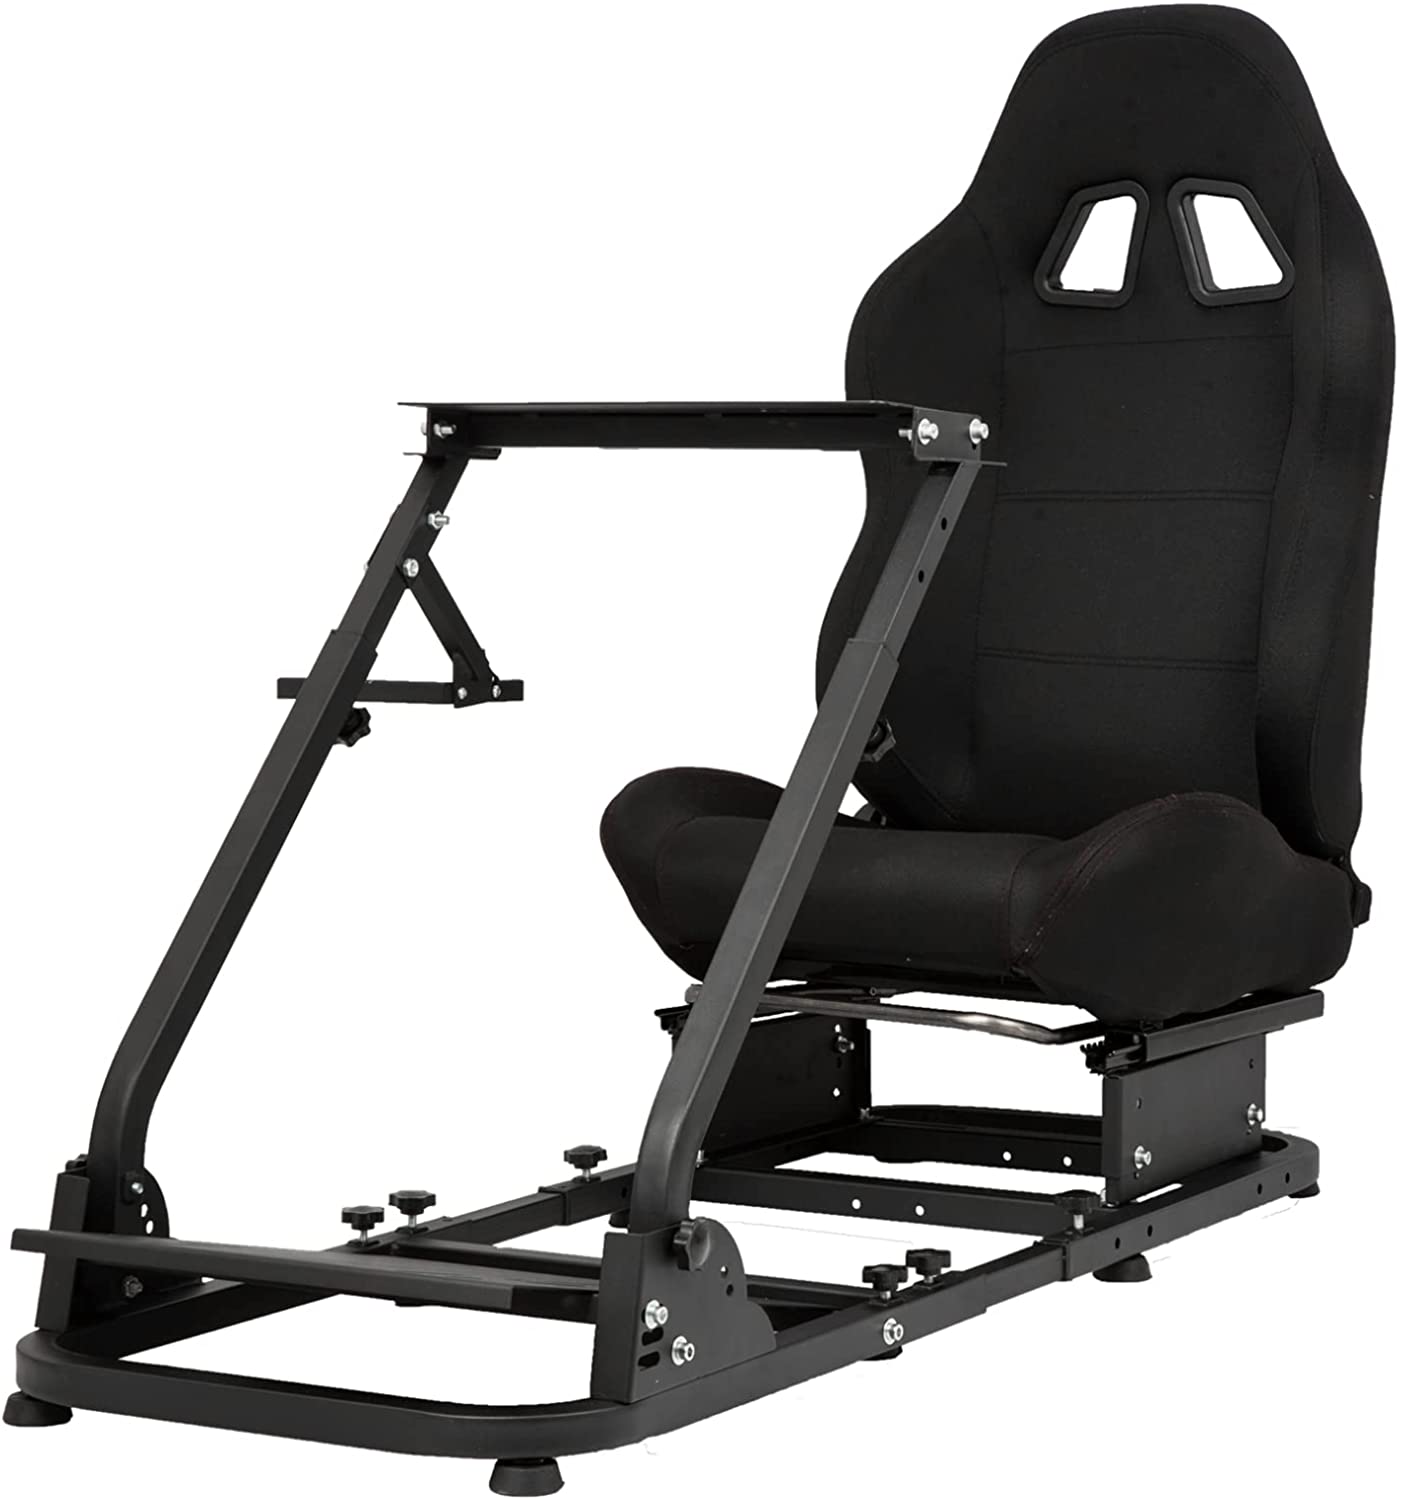 Driving Game Folding Chair Sim Racing Seat & Frame Xbox PS PC